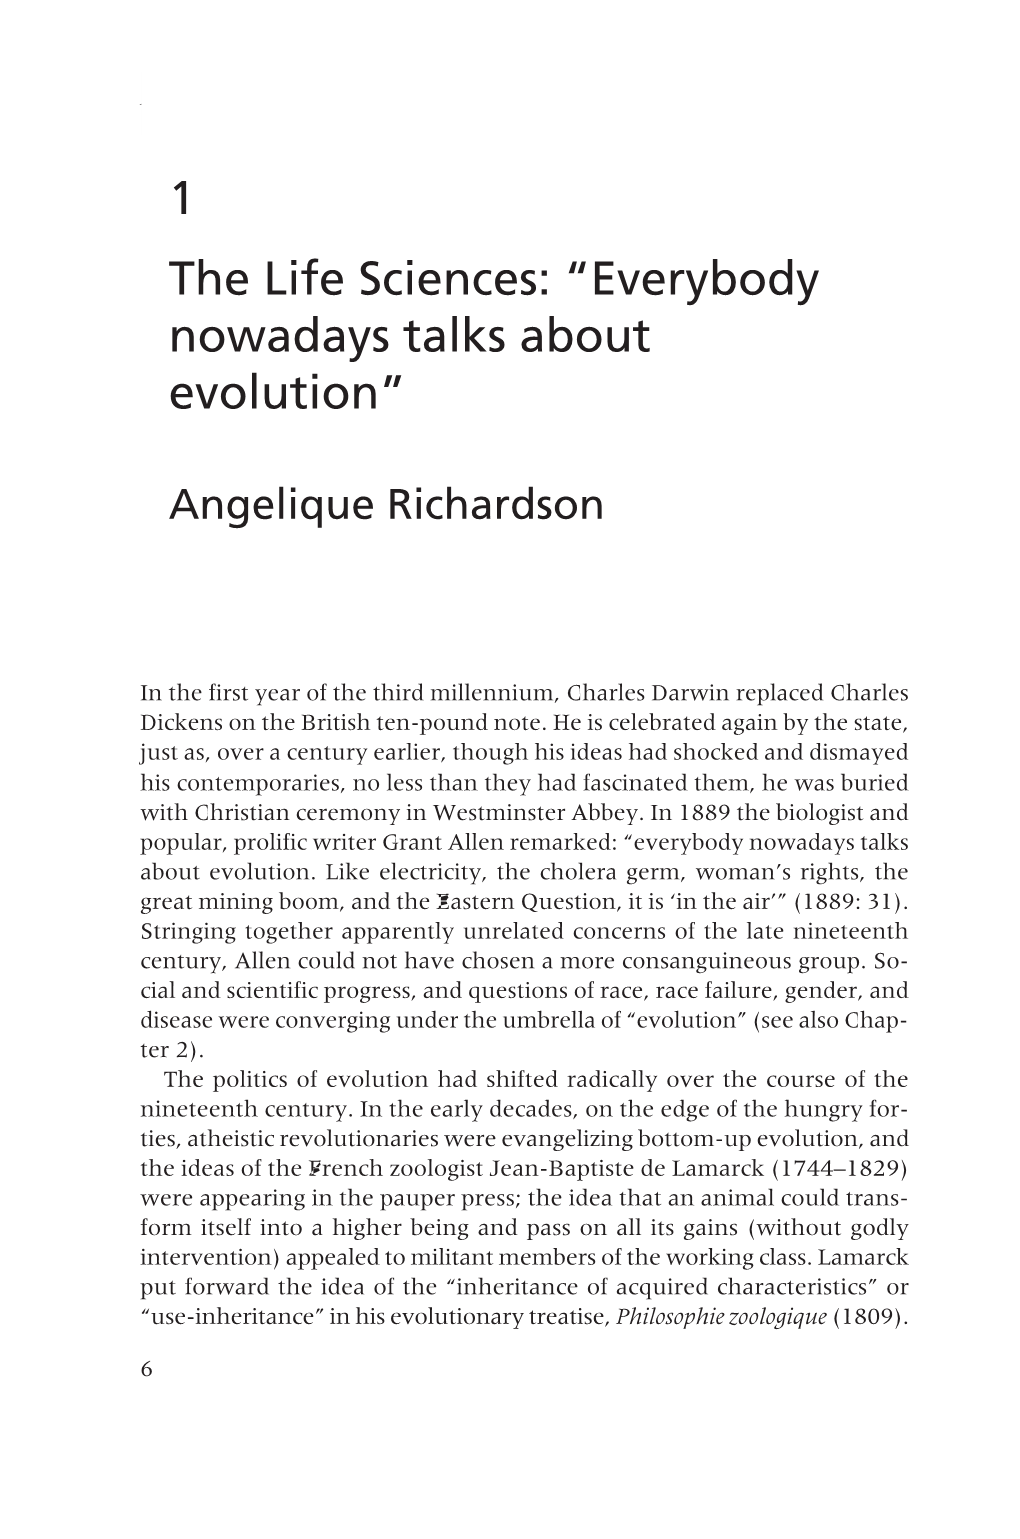 1 the Life Sciences: “Everybody Nowadays Talks About Evolution”